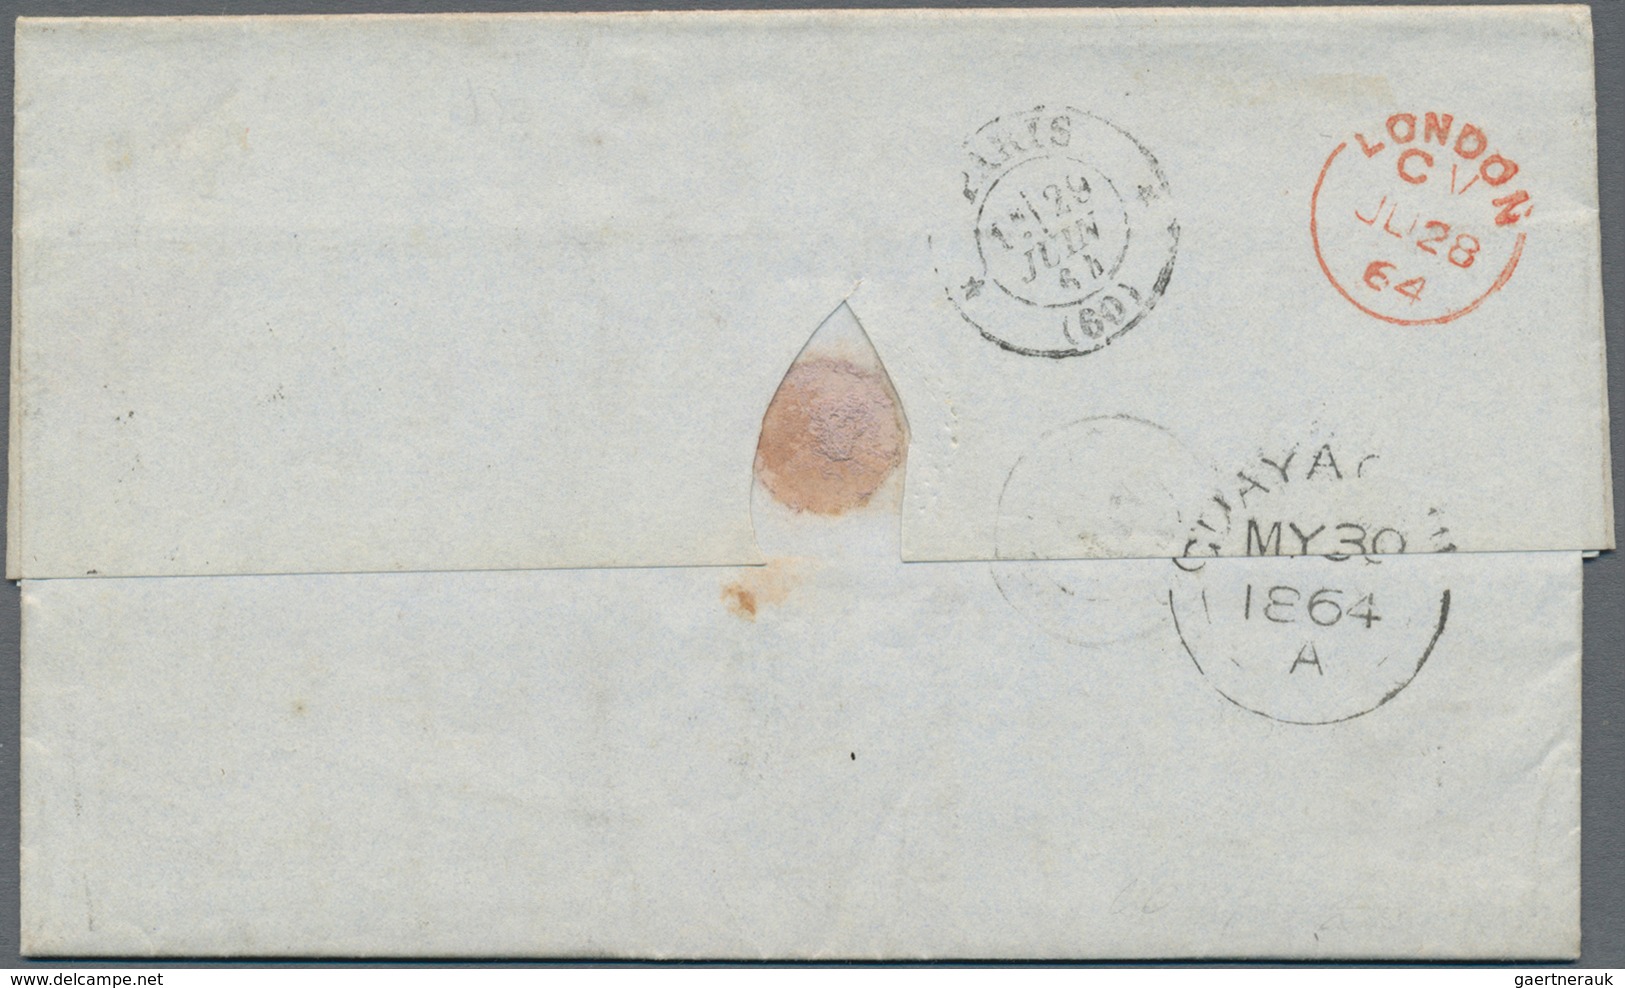 Ecuador: 1864 Entire From Guayaquil To Havre Via London And Paris, Bearing "GUAYAQUIL/MY 30/1864/A" - Ecuador